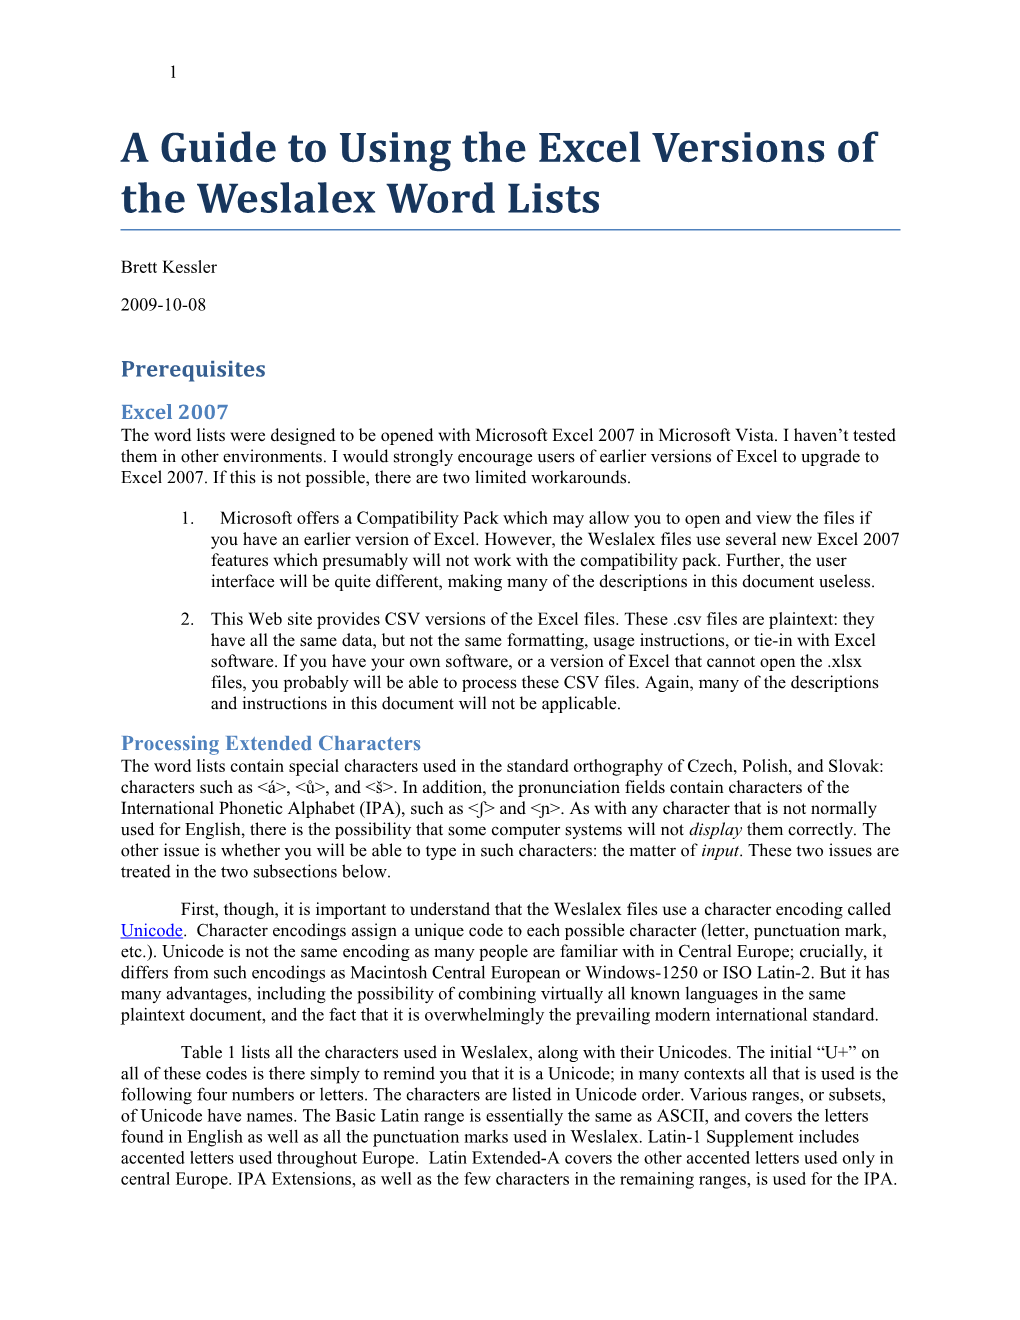 A Guide to Using the Excel Versions of the Weslalex Word Lists